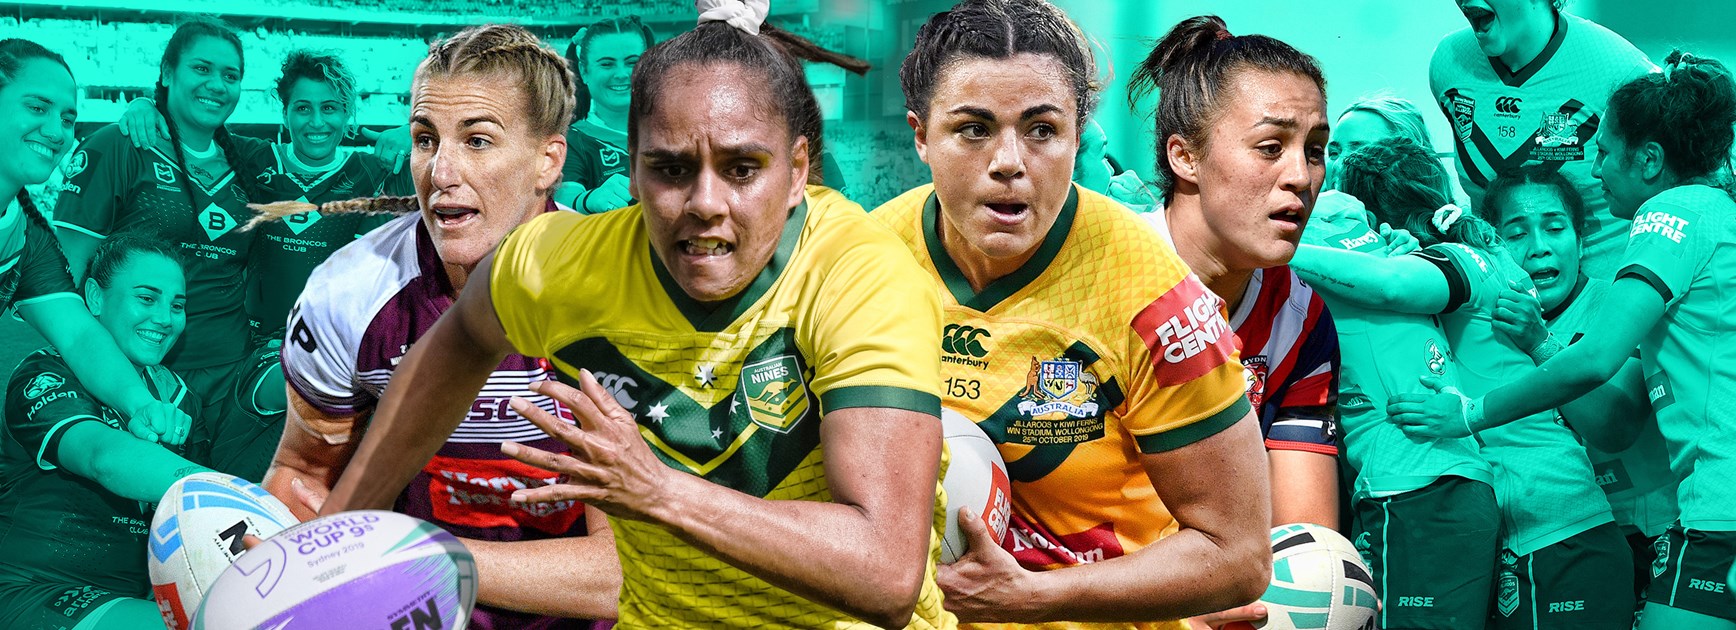 Have your say on women's rugby league